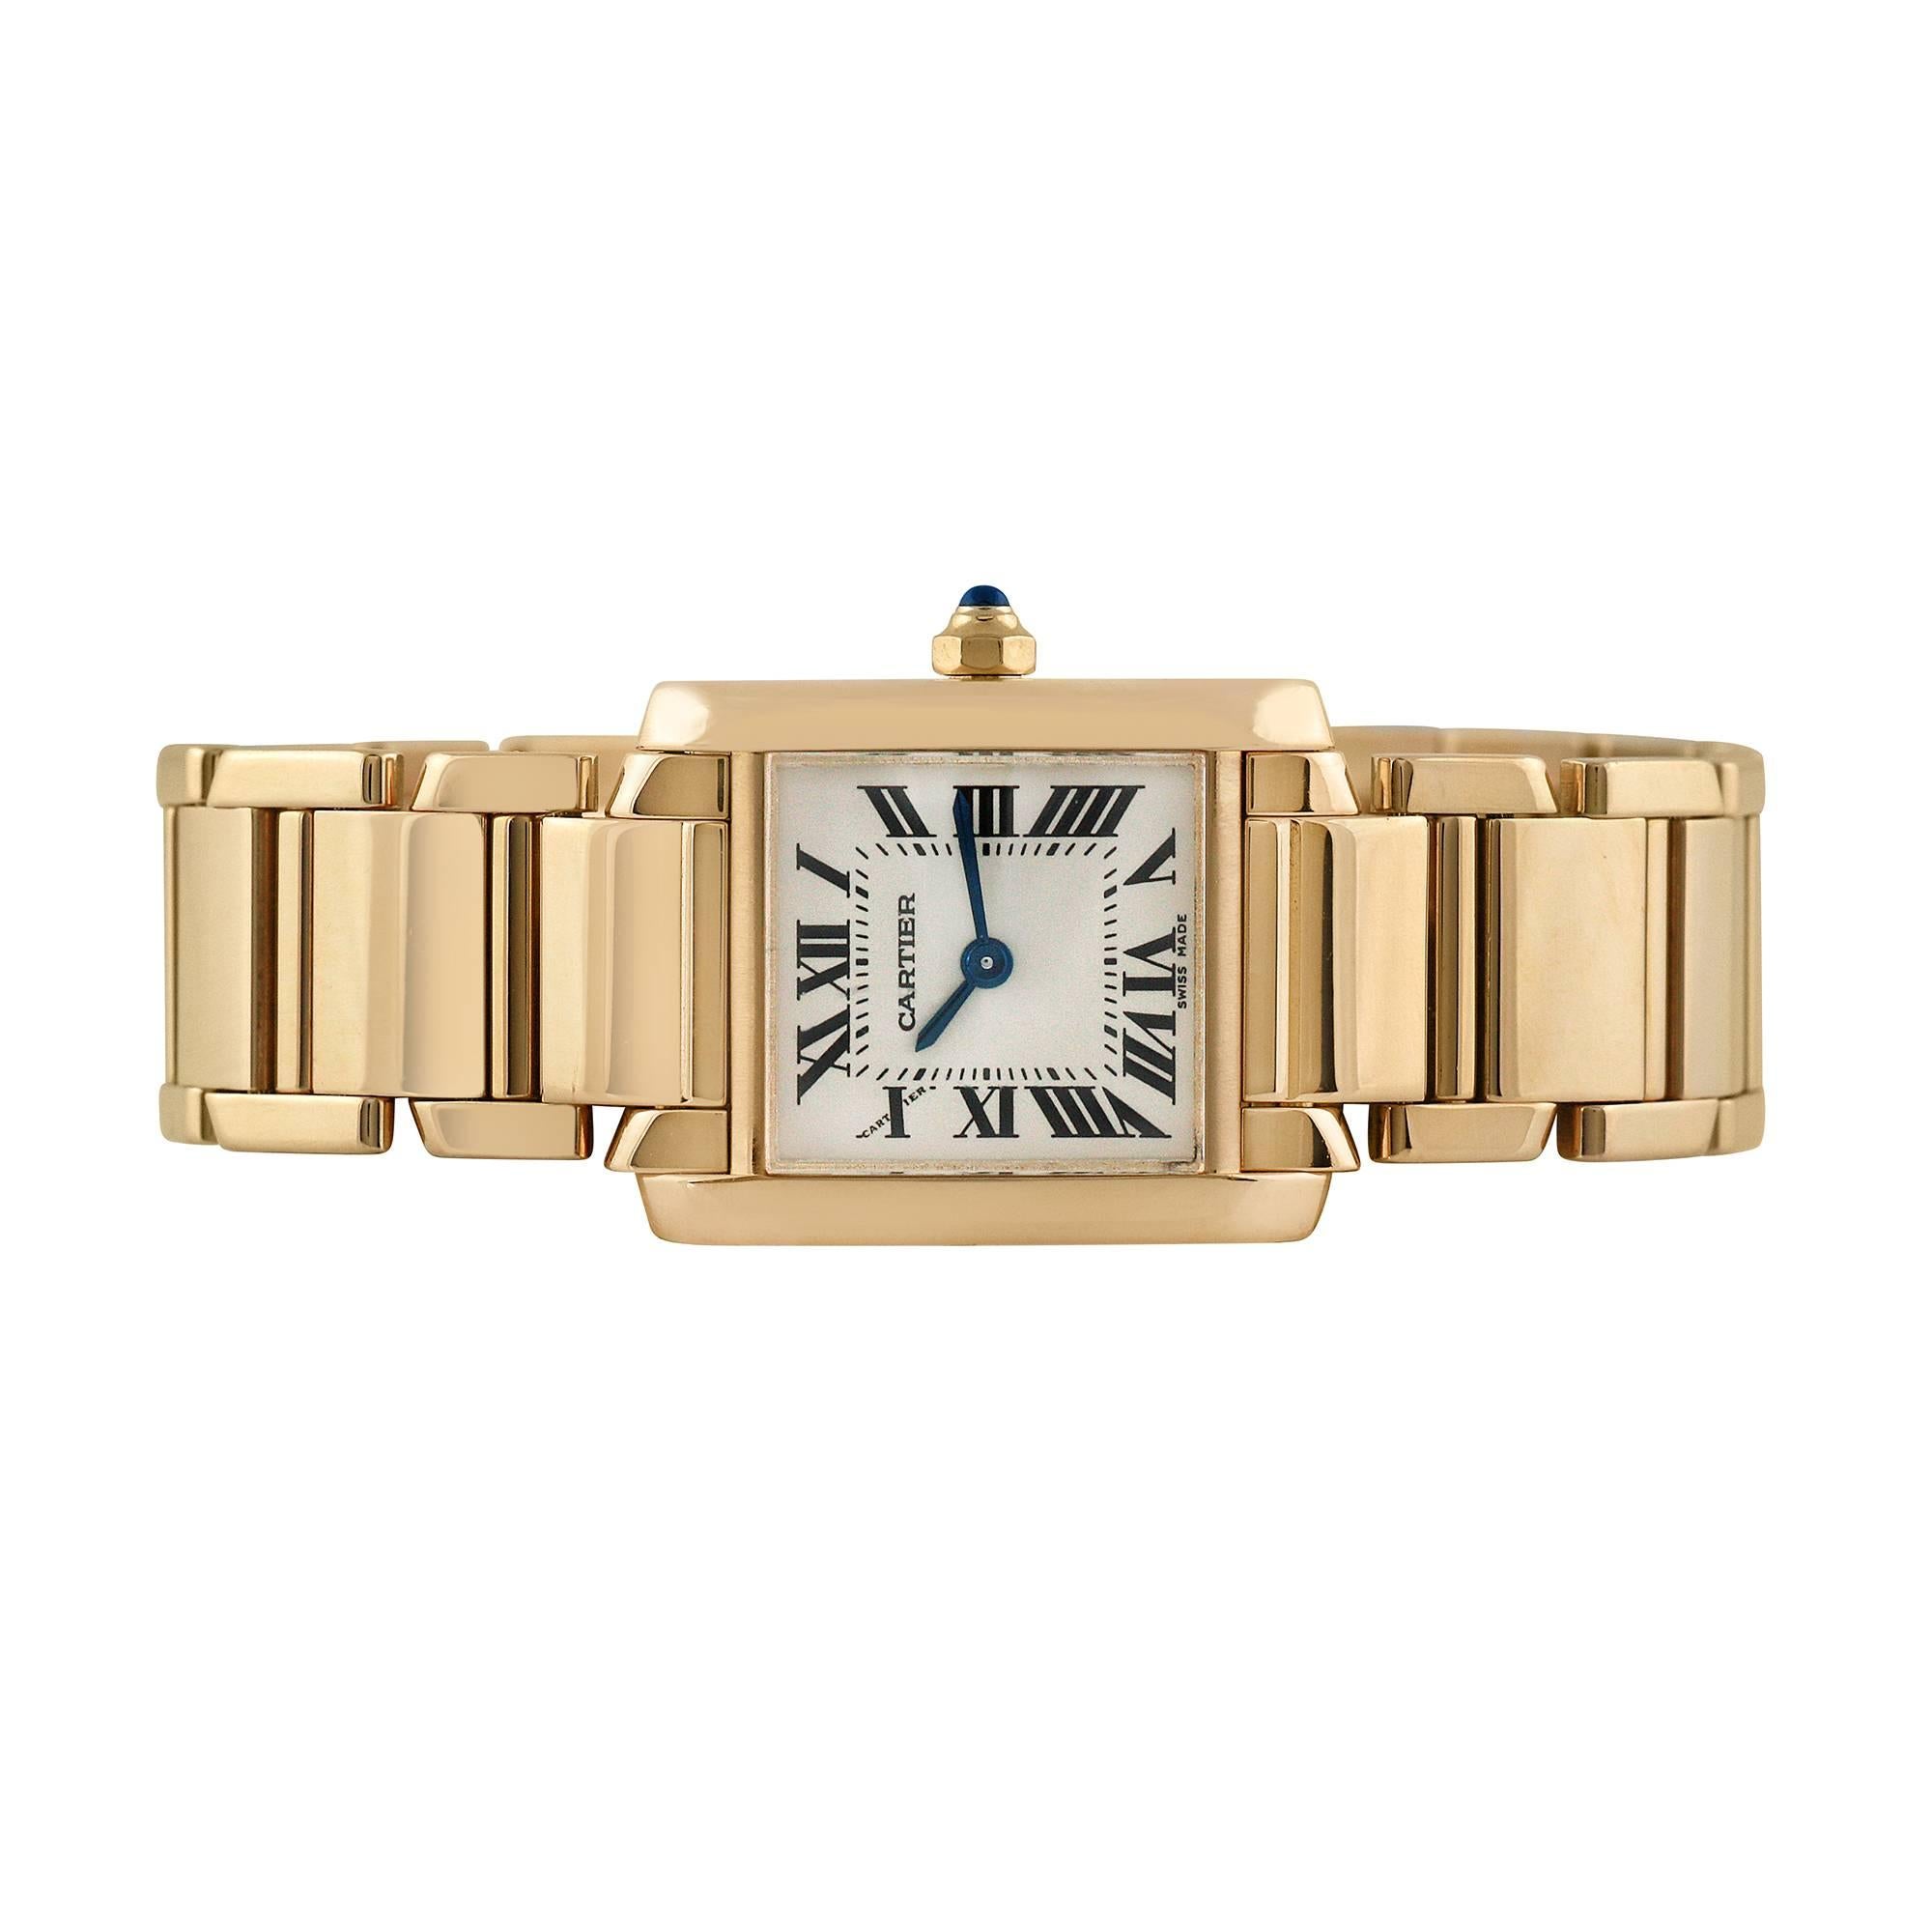 Exquisite Cartier Tank Francaise 18k Yellow Gold ladies wristwatch, reference 2385, circa 1990. Featuring an 18k Yellow Gold case, bezel and bracelet. The case size is 25mm x 20mm. Quartz movement and 30m water resistant. Hidden butterfly clasp type